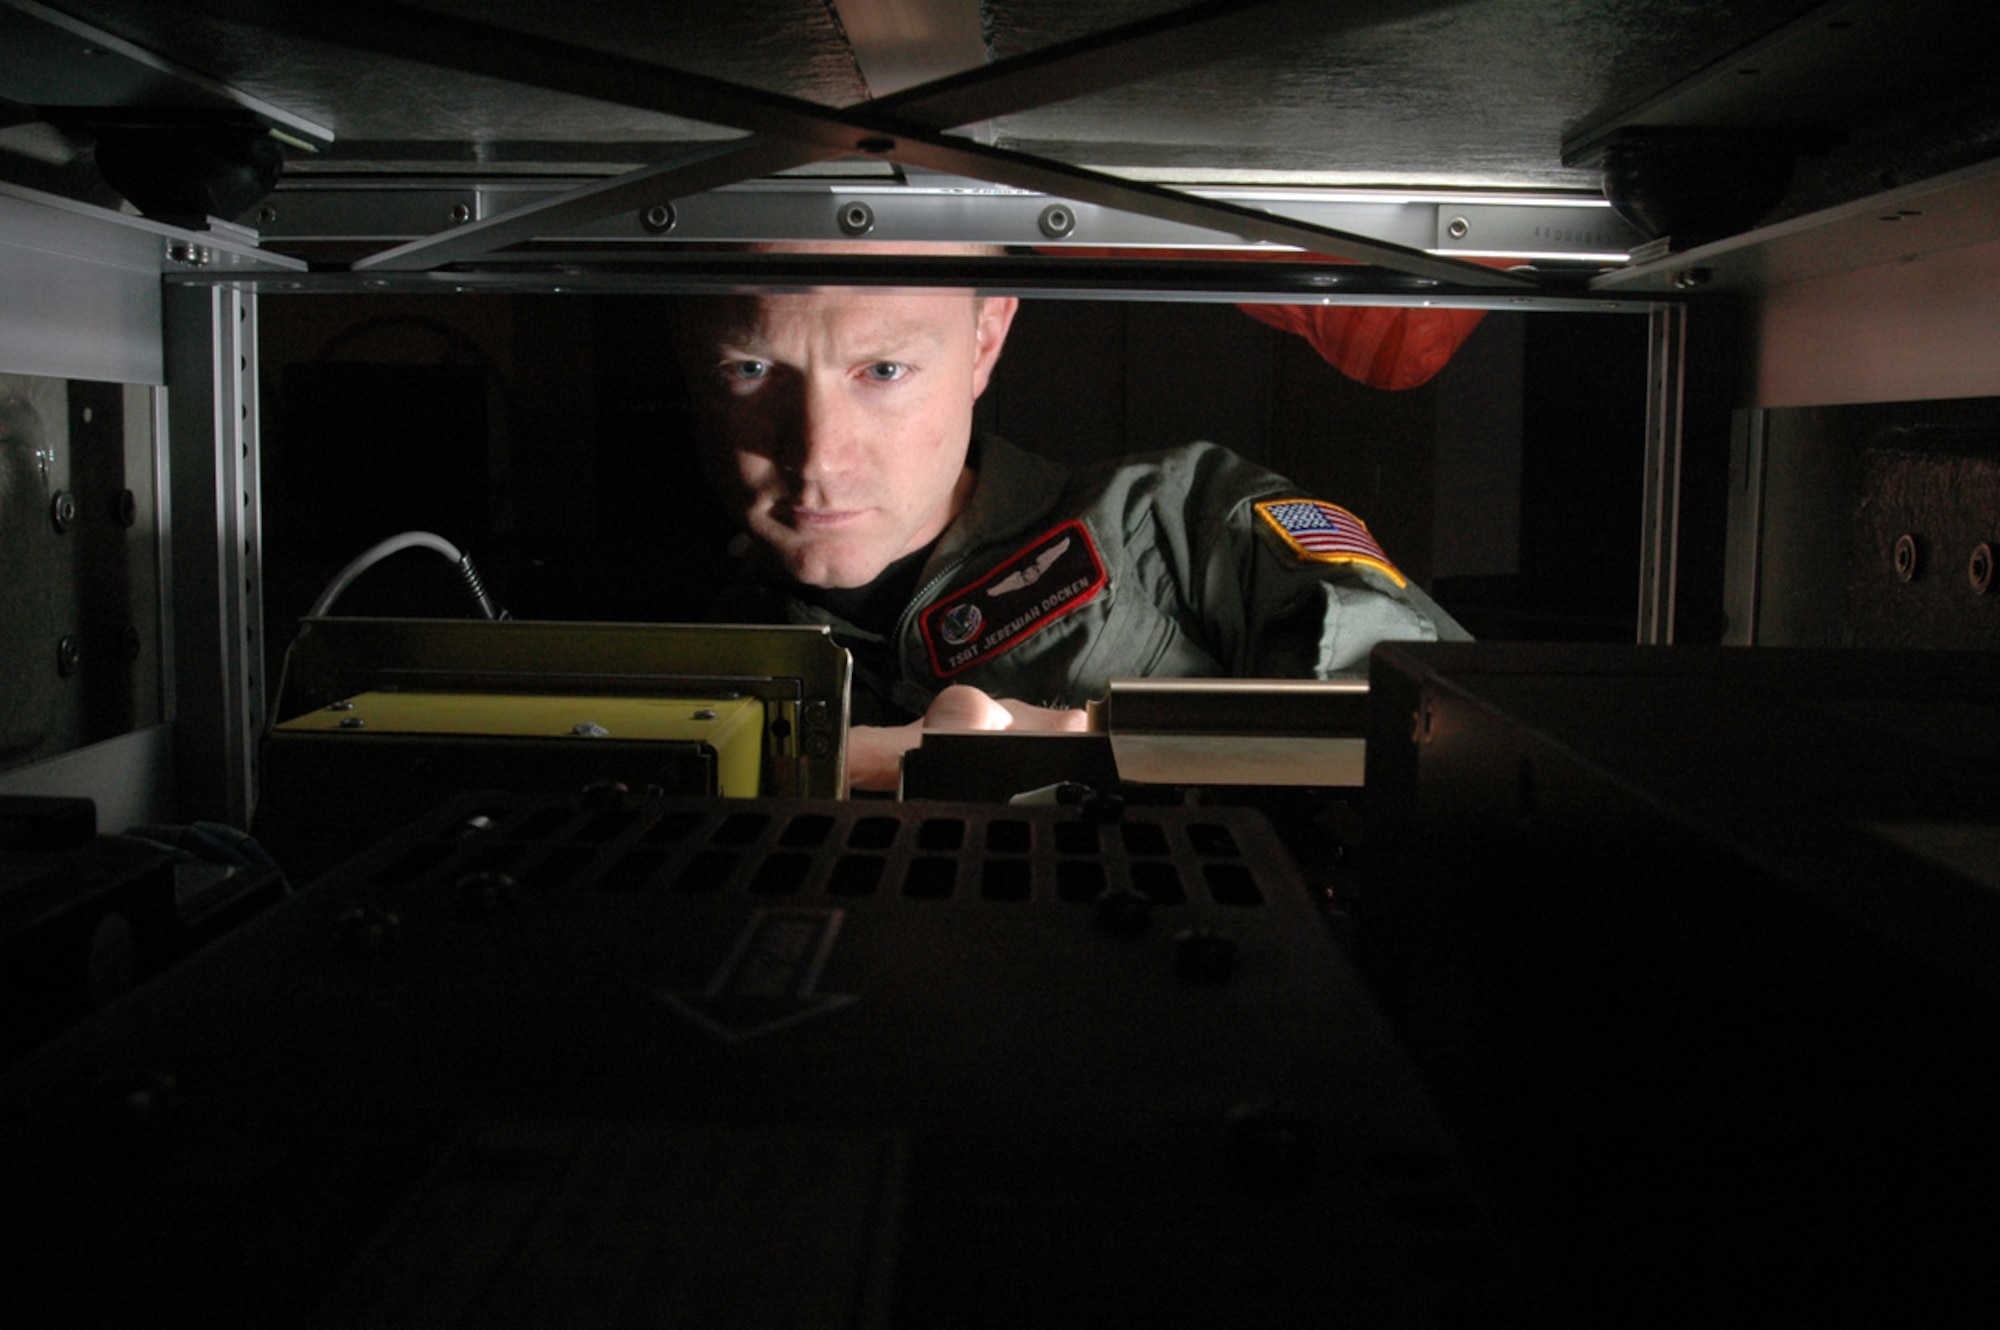 FAIRCHILD AIR FORCE BASE, Wash. (AFPN) -- Tech. Sgt. Jeremiah Docken loads data into a Roll-On Beyond Line-of-Sight Enhancement Spiral 2 kit as part of a training exercise Jan. 17. The upgraded ROBE Spiral 2 equipment brings enhancements to a system that is revolutionizing battlefield communications. Acting as a flying network node, the ROBE kits help forward data streams, voice and other information from units in the battle zone to satellites, which in turn can forward the information anywhere on the globe. Sergeant Docken is a boom operator with the 92nd Air Refueling Squadron. (U.S. Air Force photo by Staff Sgt. Nathan Gallahan) 